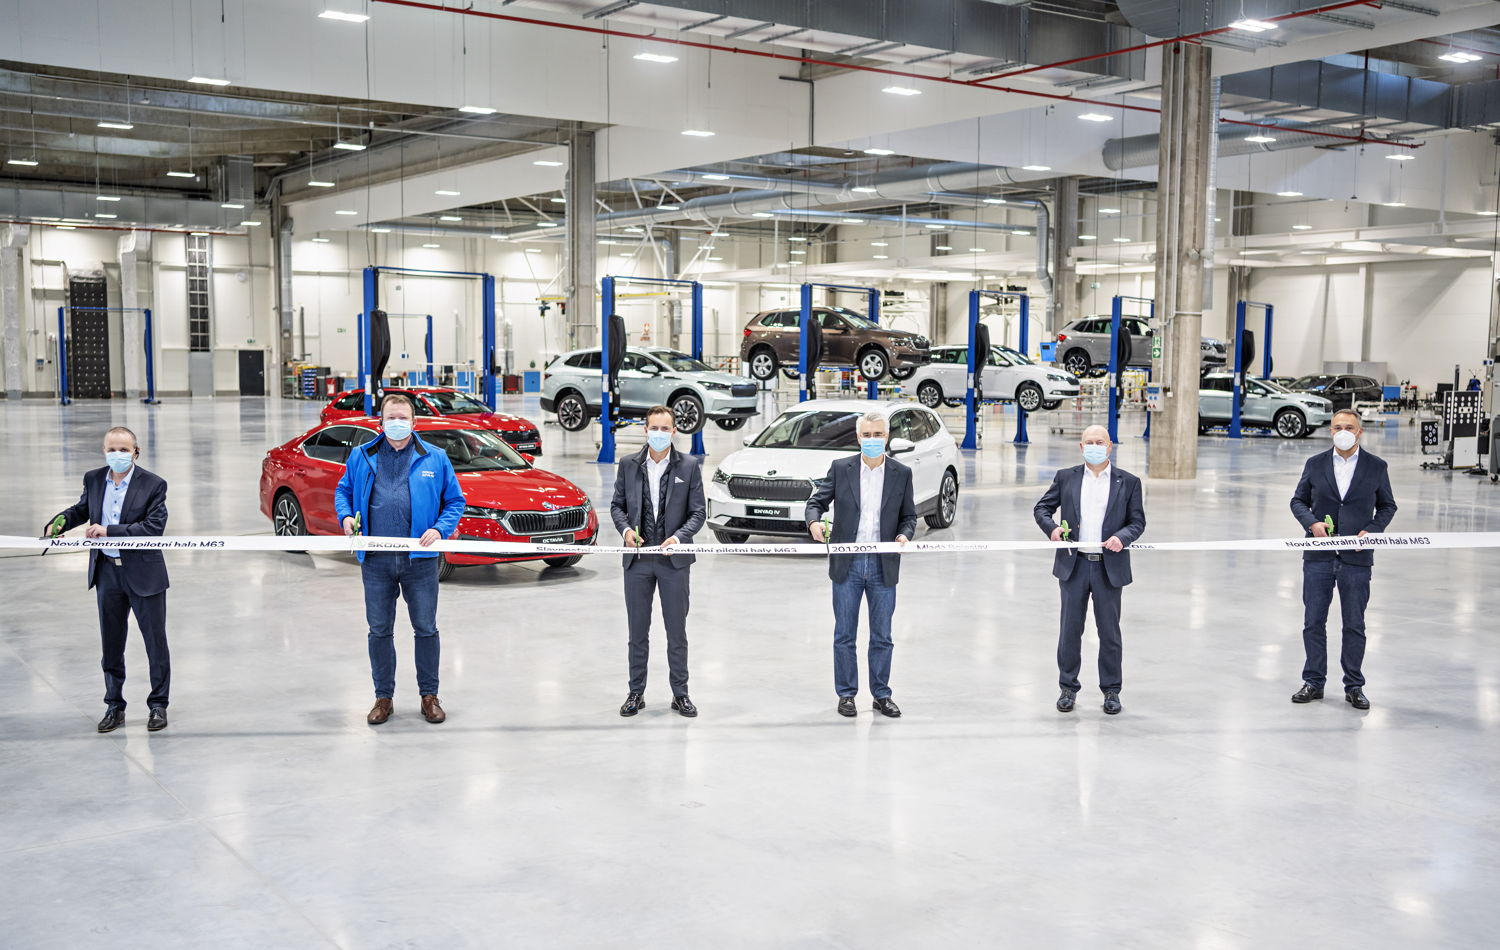 From left to right: Head of Company Planning at
ŠKODA AUTO, Jiří Drbout, Vice-Chairman of KOVO MB
Trade Unions Josef Zmrhal, ŠKODA AUTO CEO Thomas
Schäfer, ŠKODA AUTO Board Member for Production and
Logistics Dr. Michael Oeljeklaus, Head of Launch
Management Petr Kuba and Head of Quality Management
Dr. Florian Weymar at the opening of the carmaker’s new
Central Pilot Hall at the company’s headquarters in Mladá
Boleslav.
